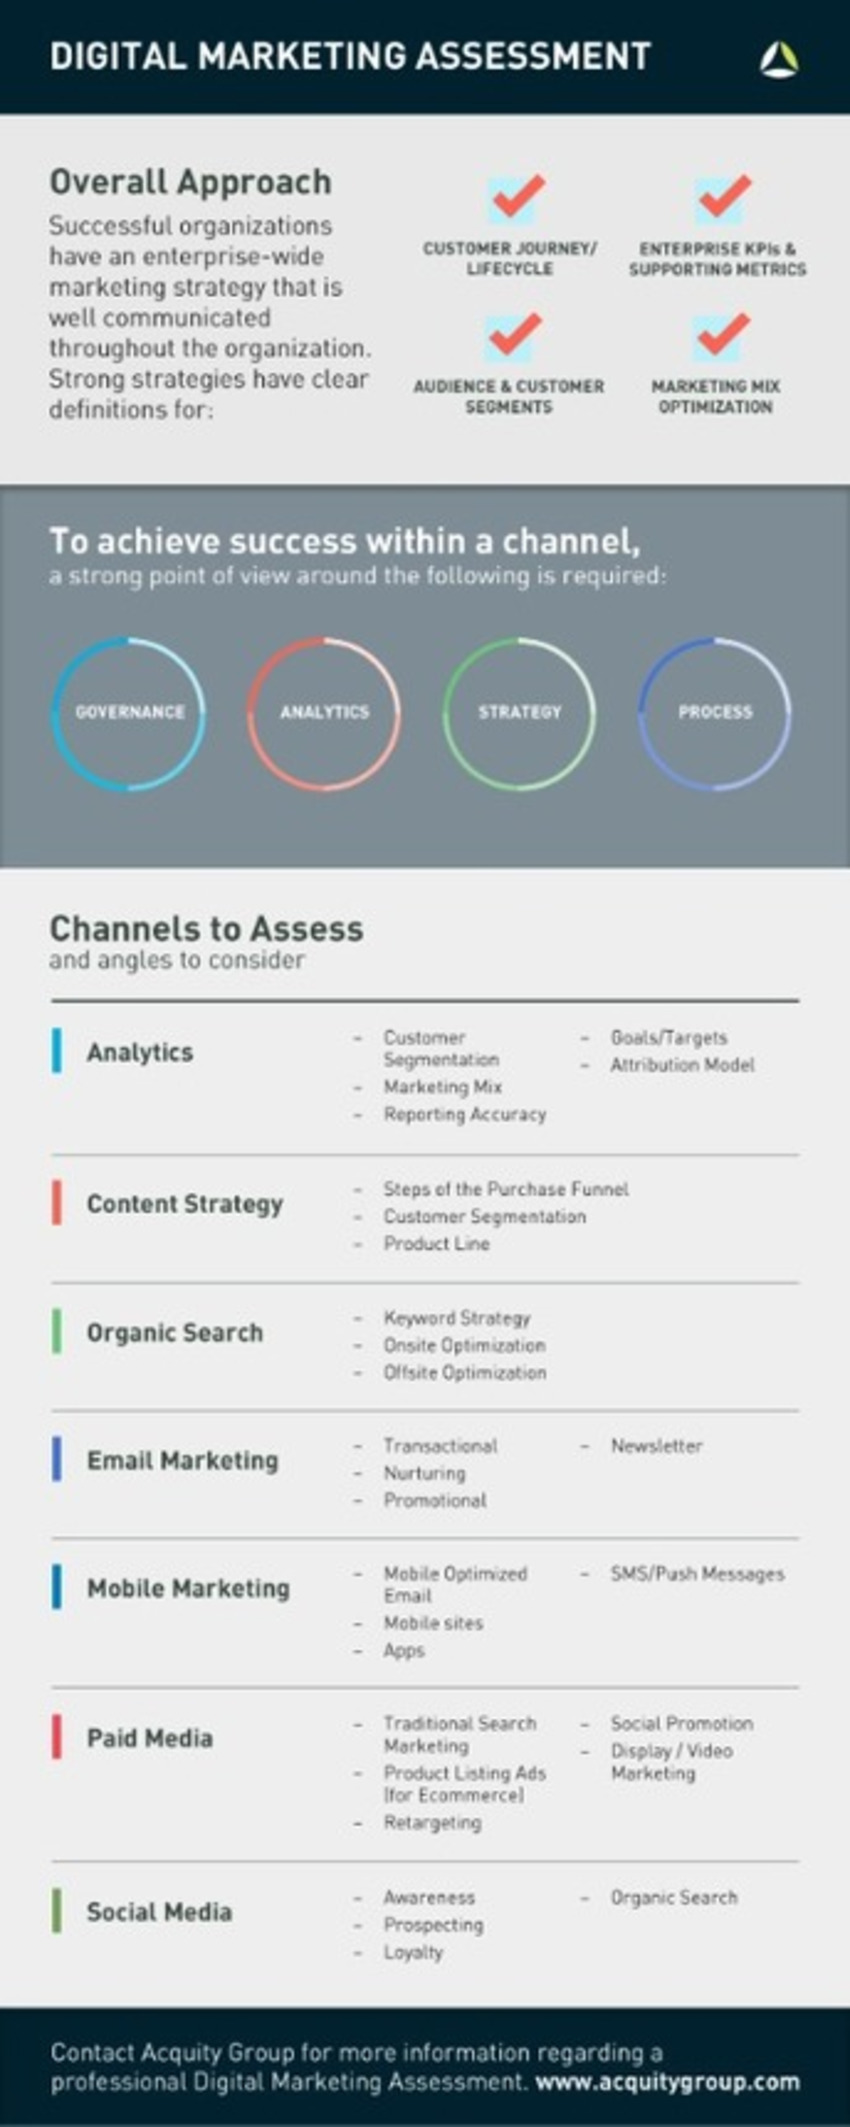 Digital Marketing Success Infographic - Acquity Group | The MarTech Digest | Scoop.it